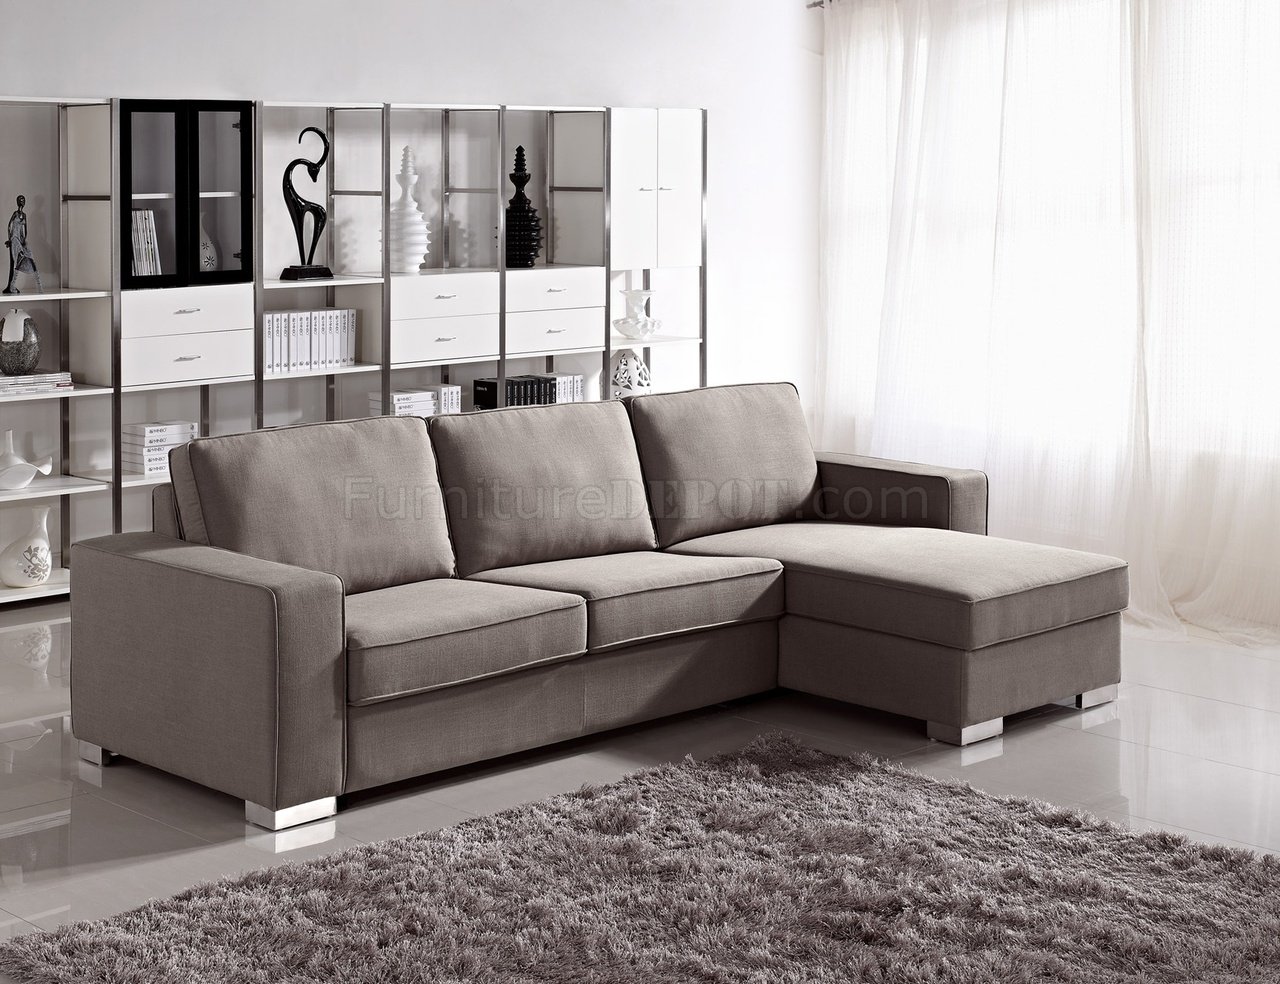 non fabric double sectional sofa bed